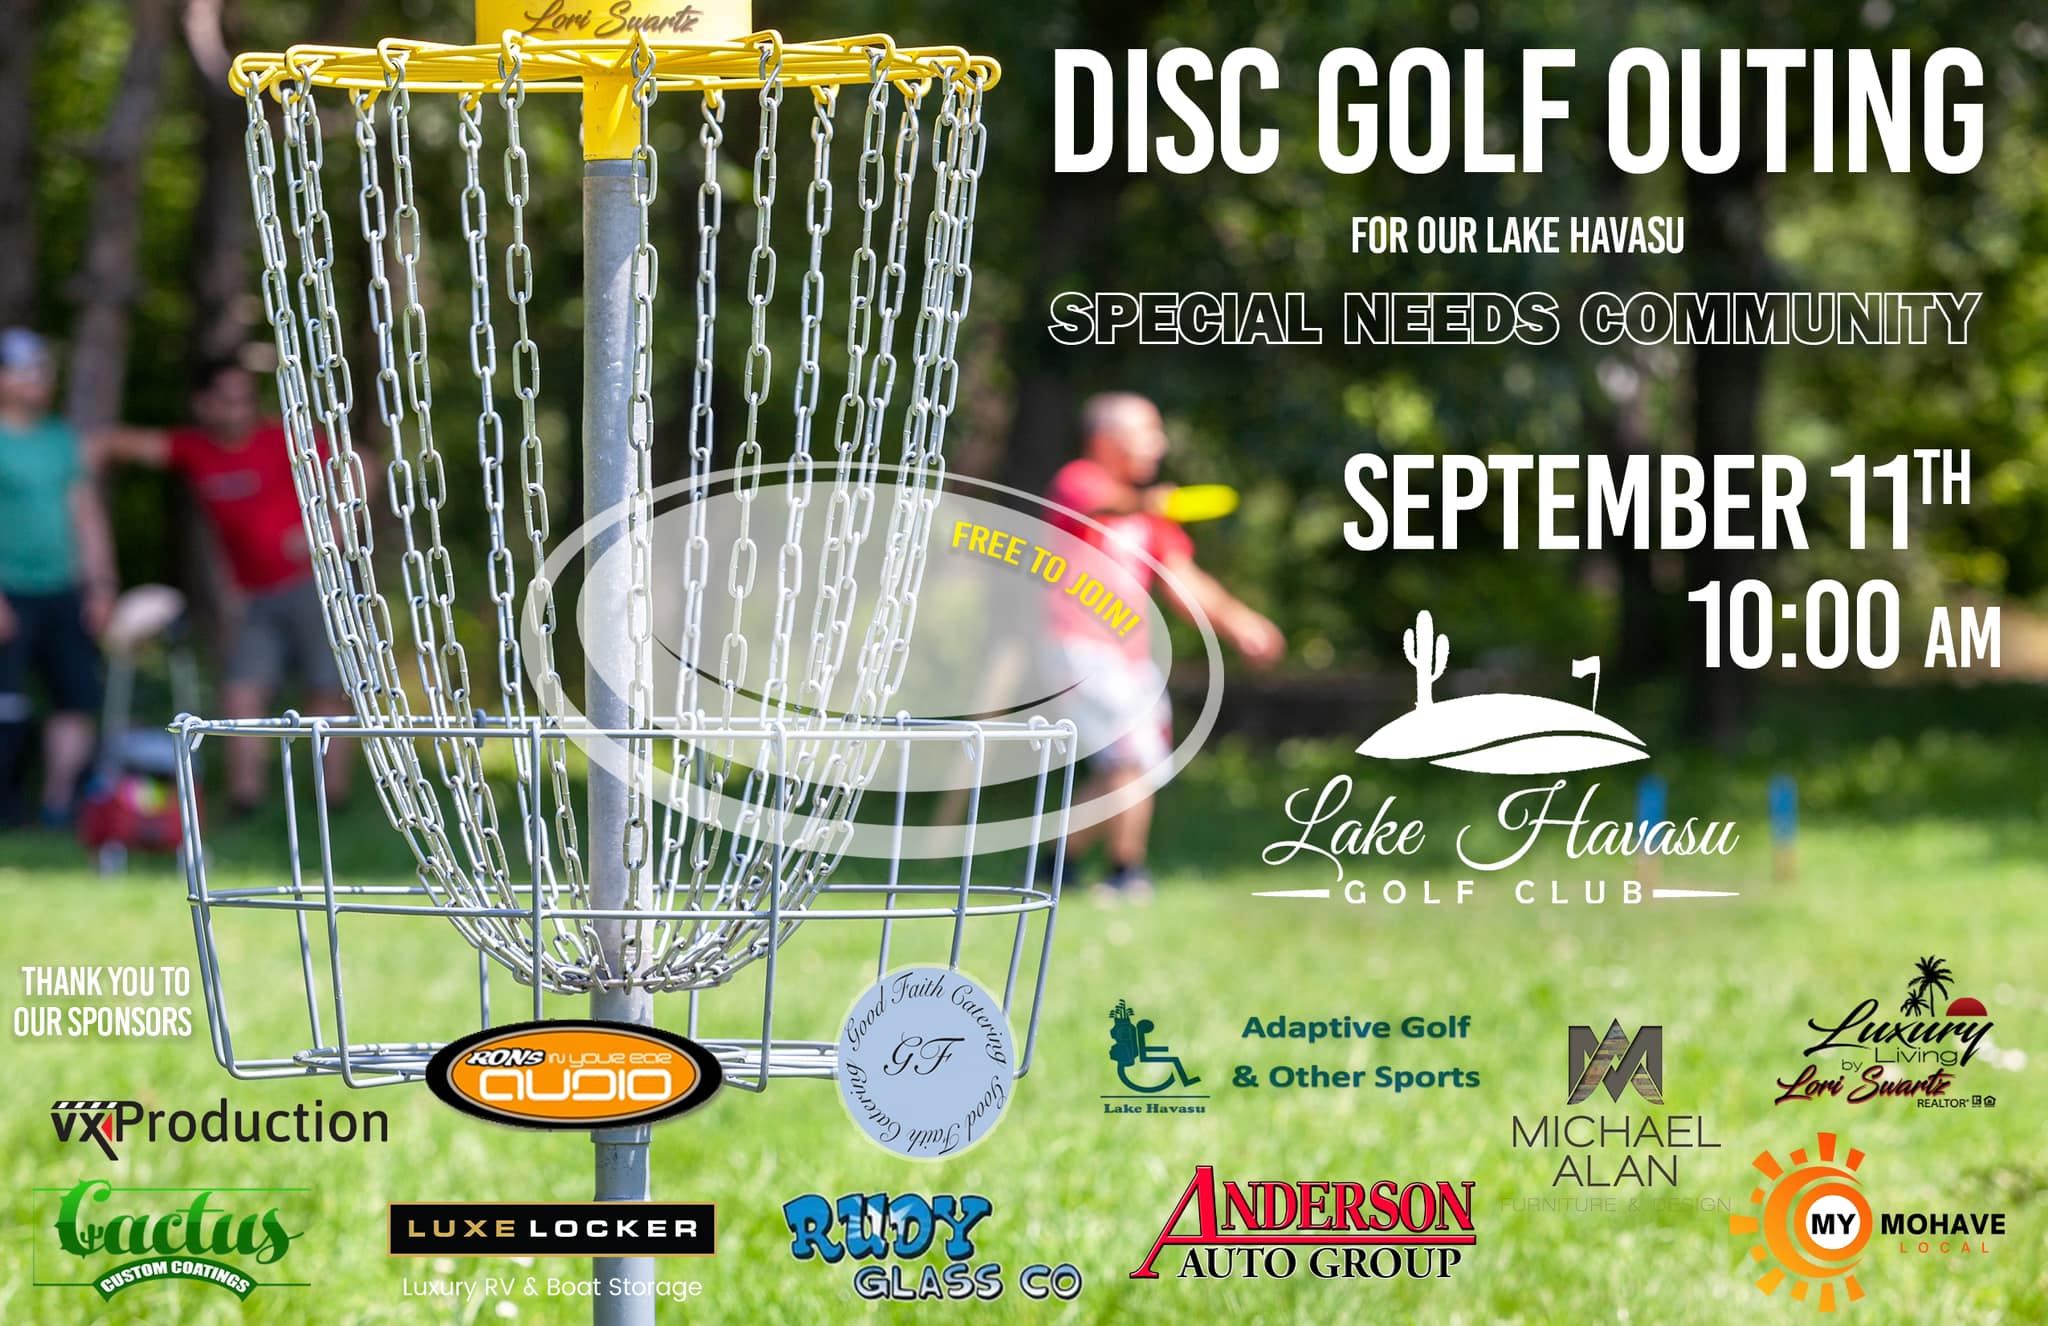 Disk Golf Outing